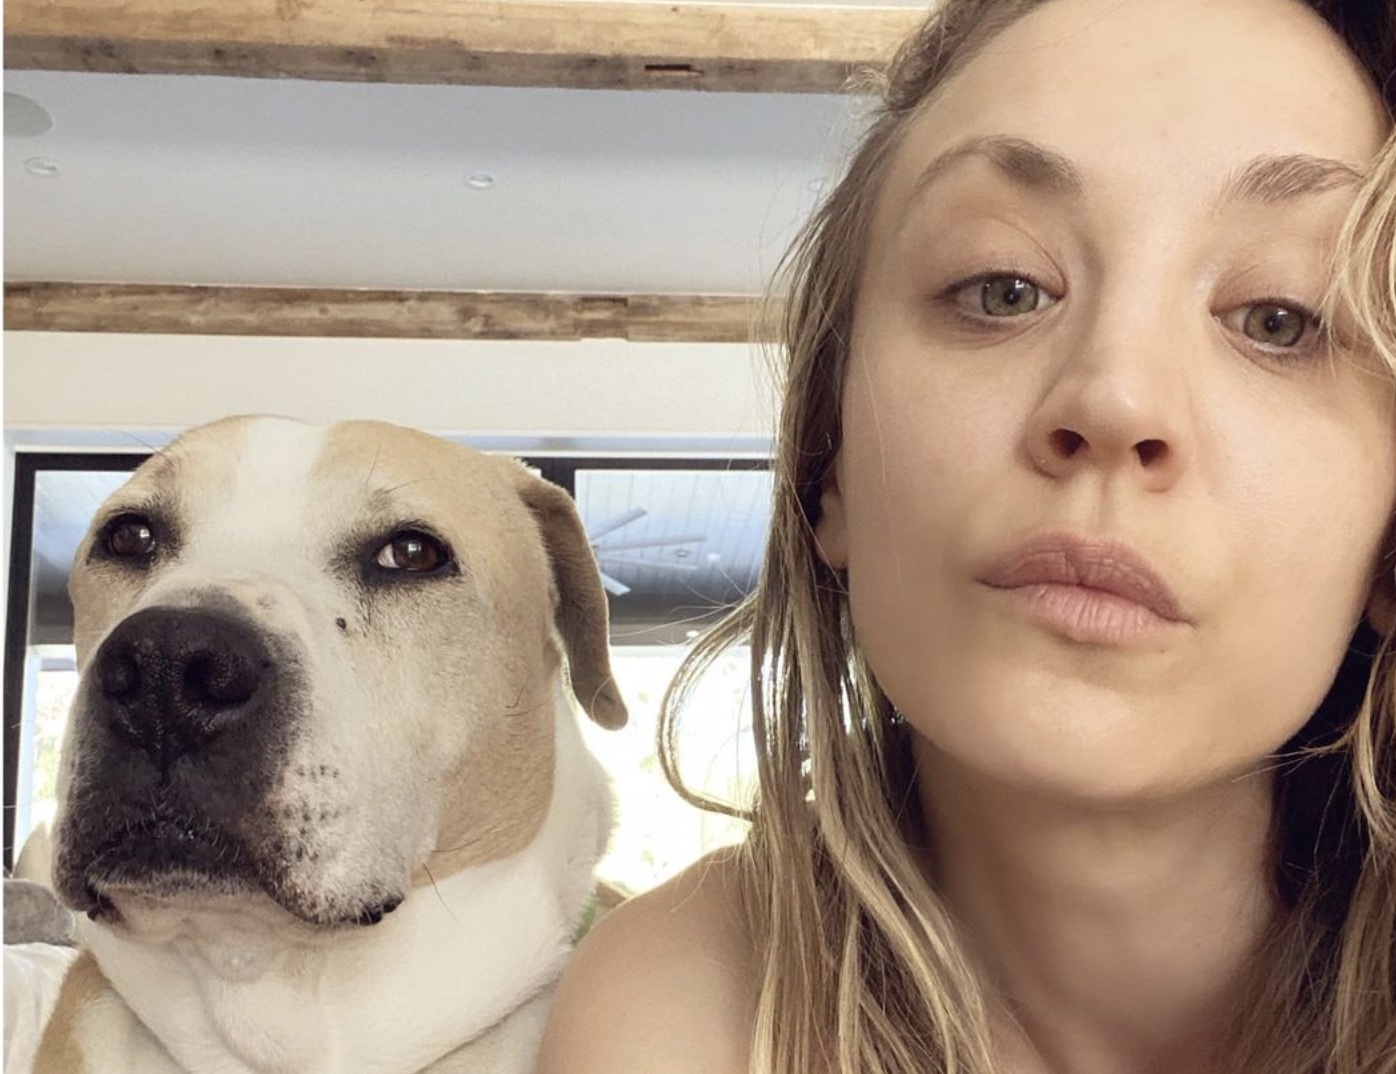 Kaley Cuoco Shares Heartbreaking News About Her Dog Norman Kaley cuoco's yes, norman will join forces with berlanti productions and wbtv to develop the story of doris day as a limited series. kaley cuoco shares heartbreaking news